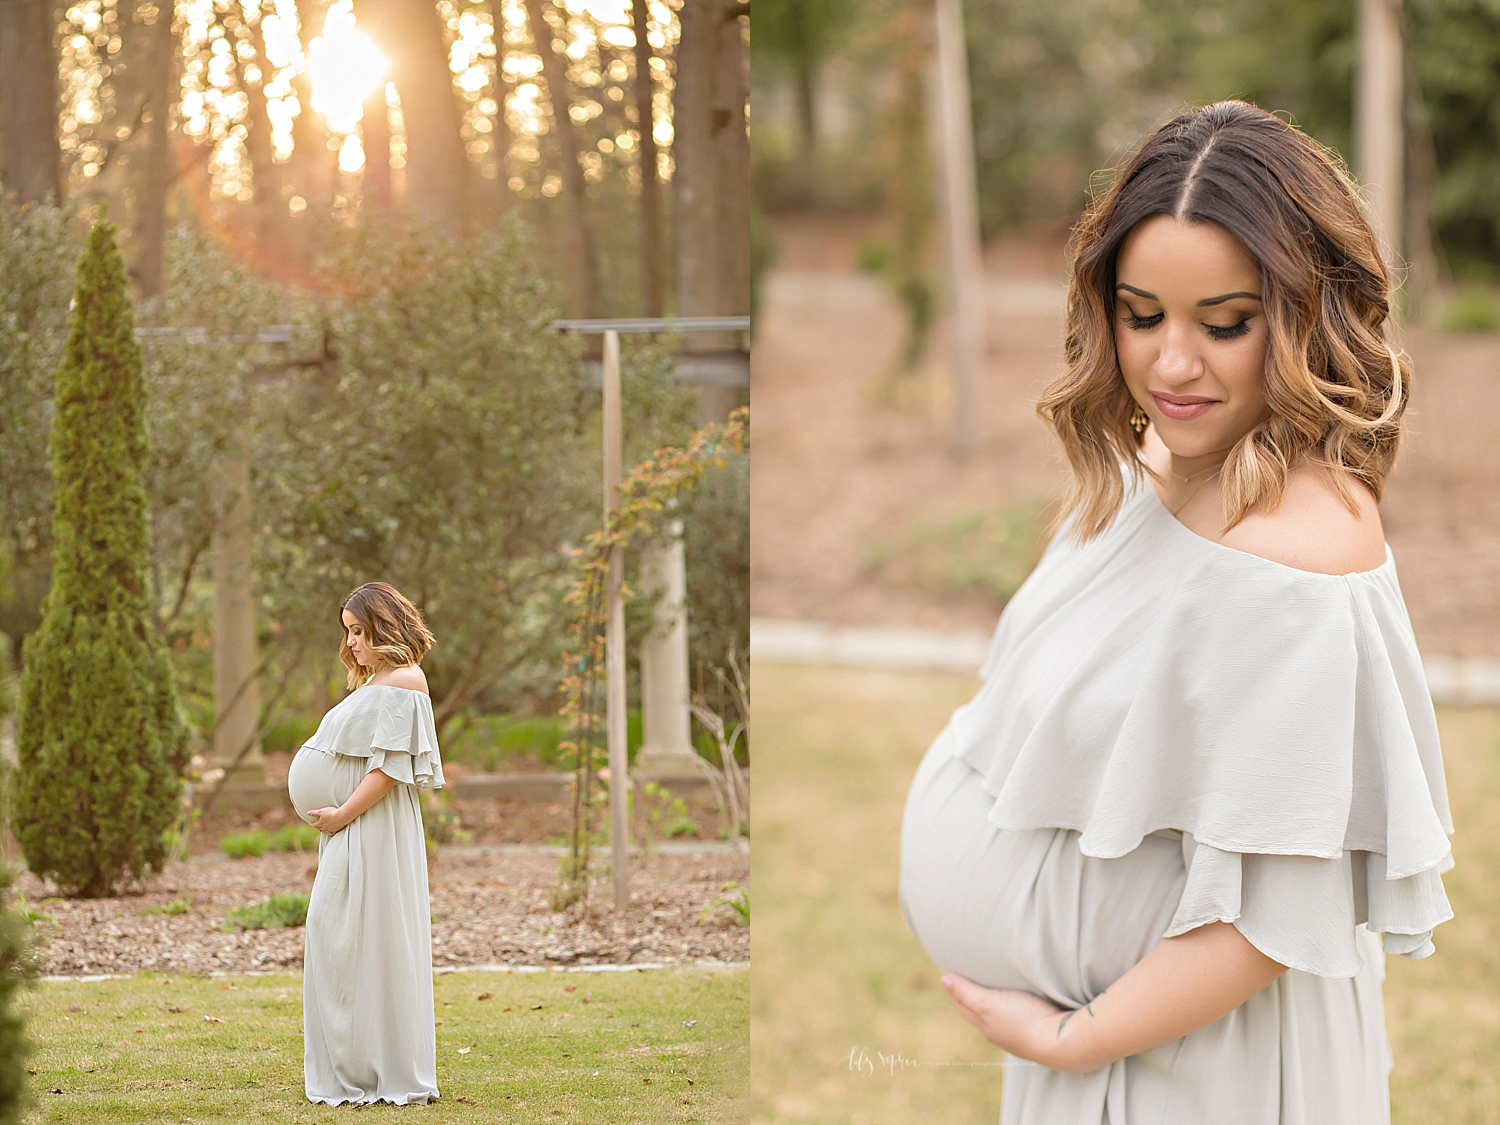  Side by side images of a pregnant woman, wearing a gray, silk, off the shoulder dress, with her hands under her belly.  